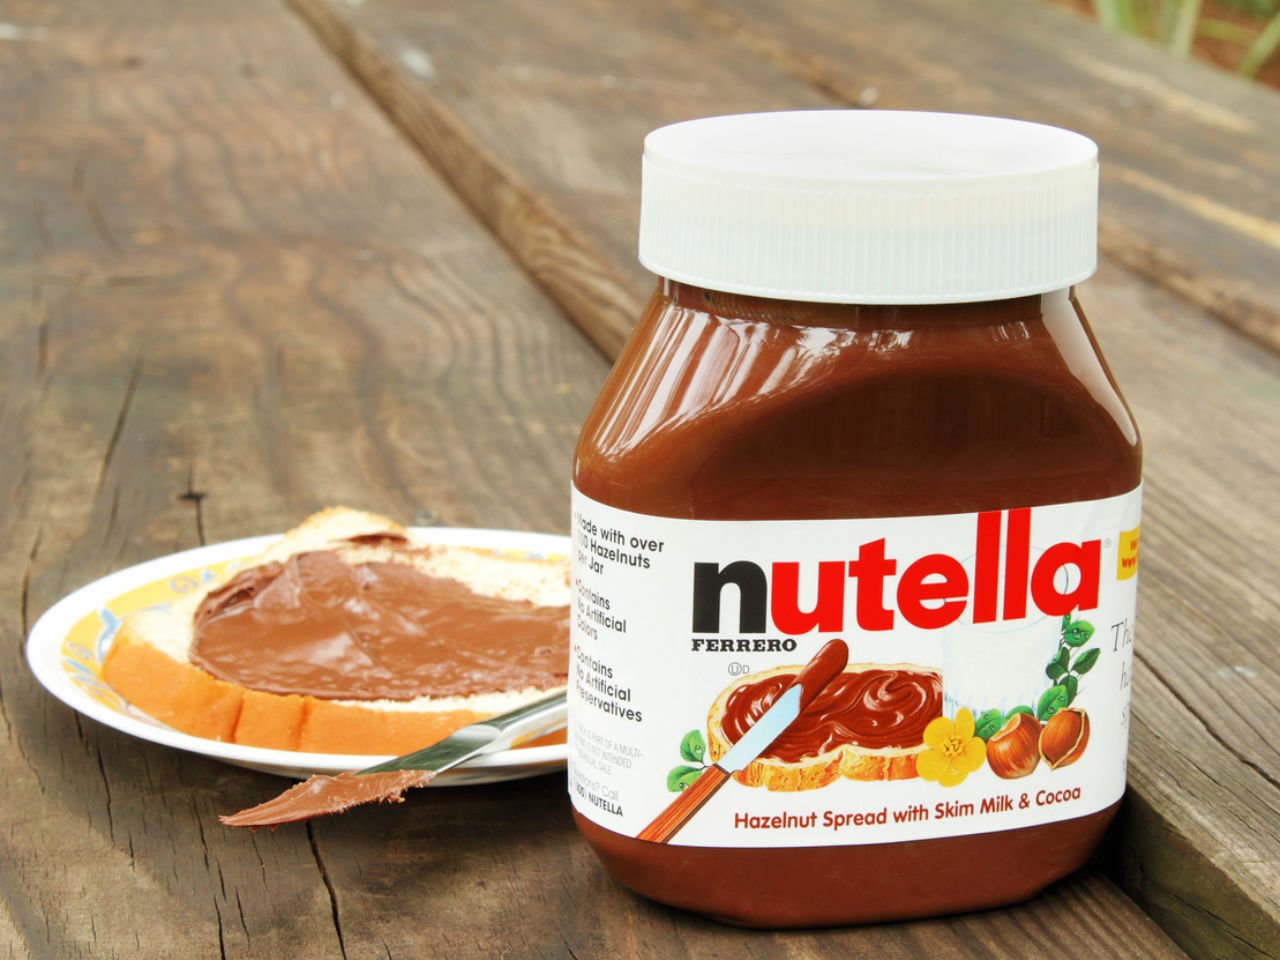 Should you freak out about Nutella?